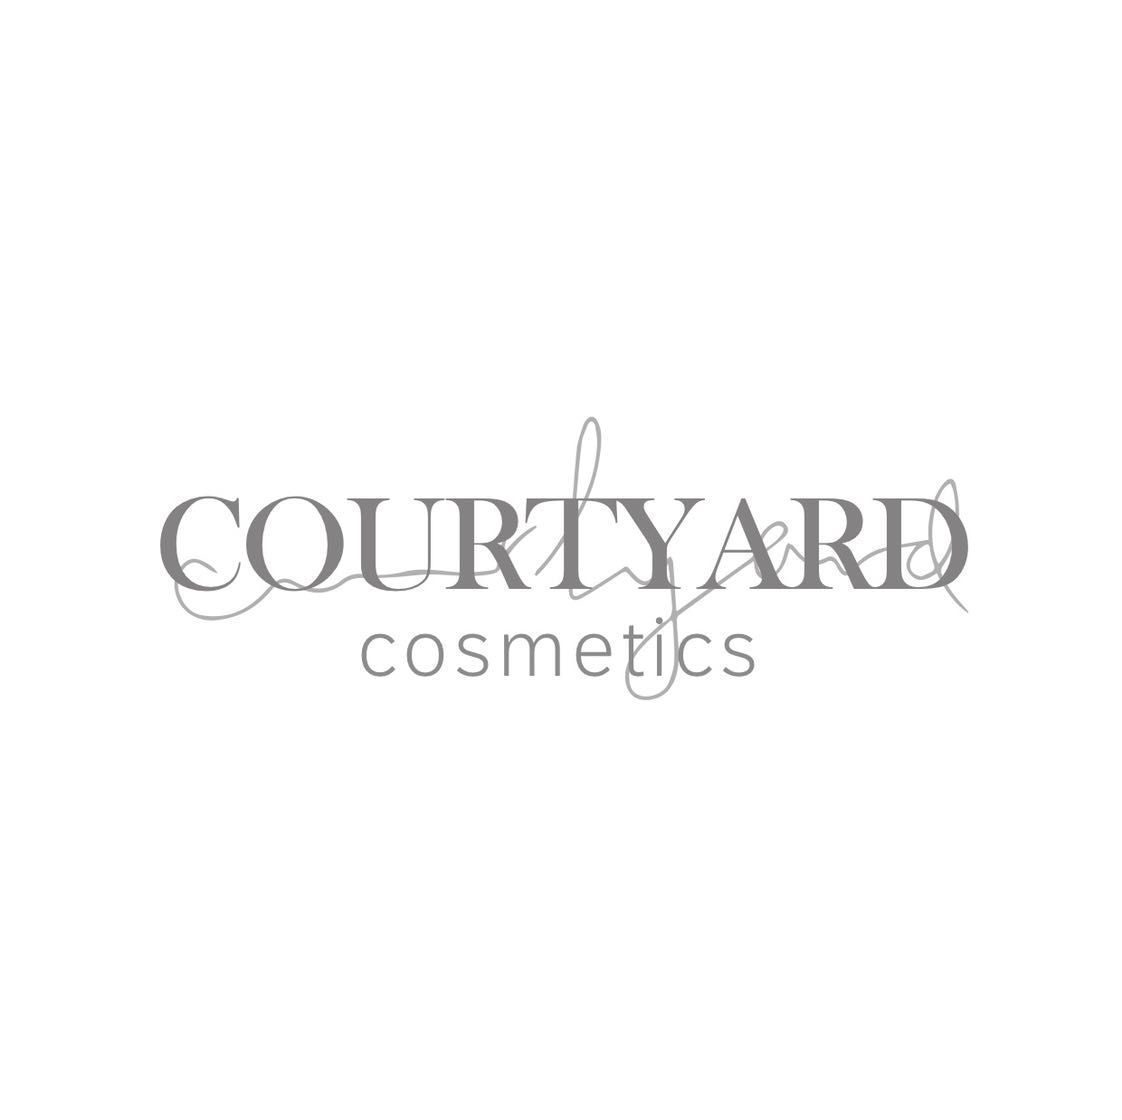 Courtyard Cosmetics, 07716262661 for details, NN18 8HG, Corby